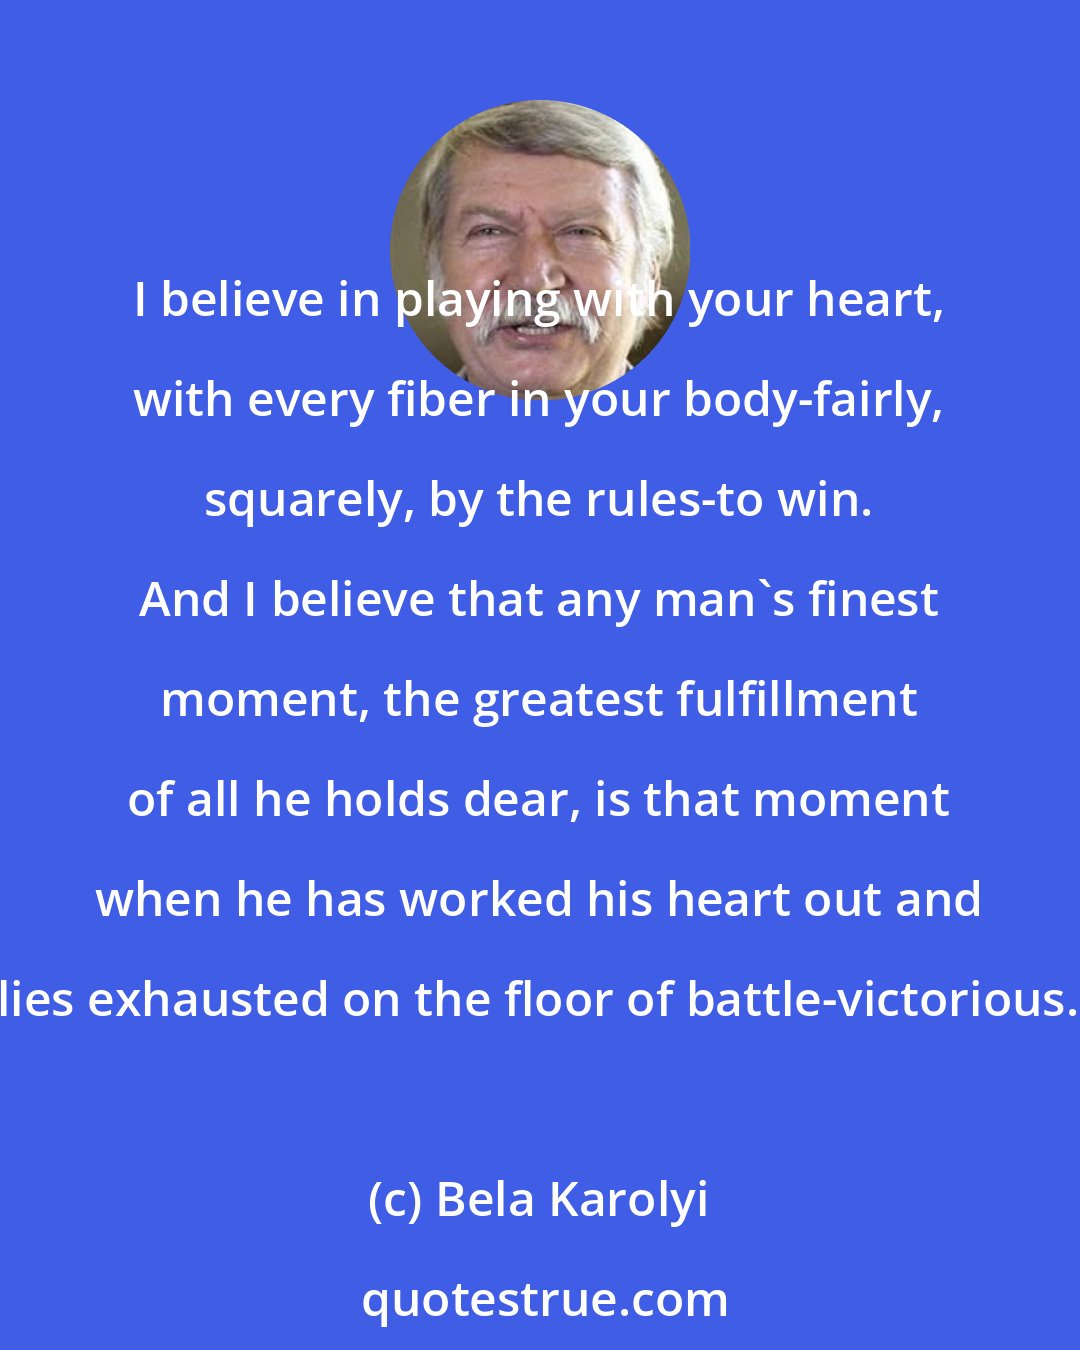 Bela Karolyi: I believe in playing with your heart, with every fiber in your body-fairly, squarely, by the rules-to win. And I believe that any man's finest moment, the greatest fulfillment of all he holds dear, is that moment when he has worked his heart out and lies exhausted on the floor of battle-victorious.